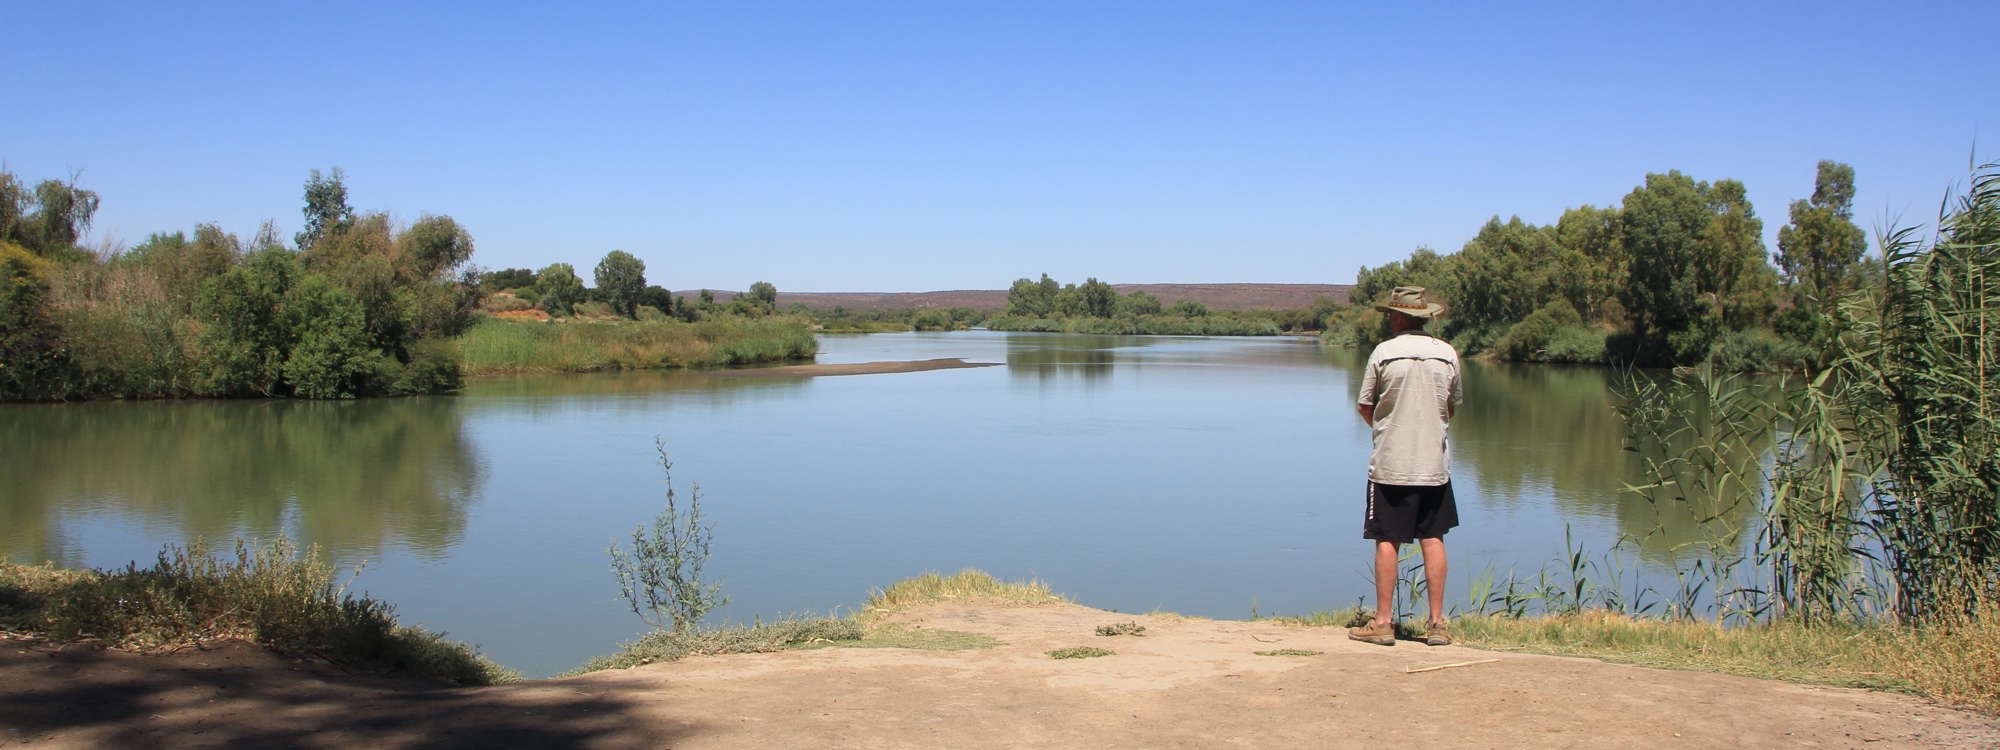 Kevin standing at the confluence of the Orange and Vaal Rivers.